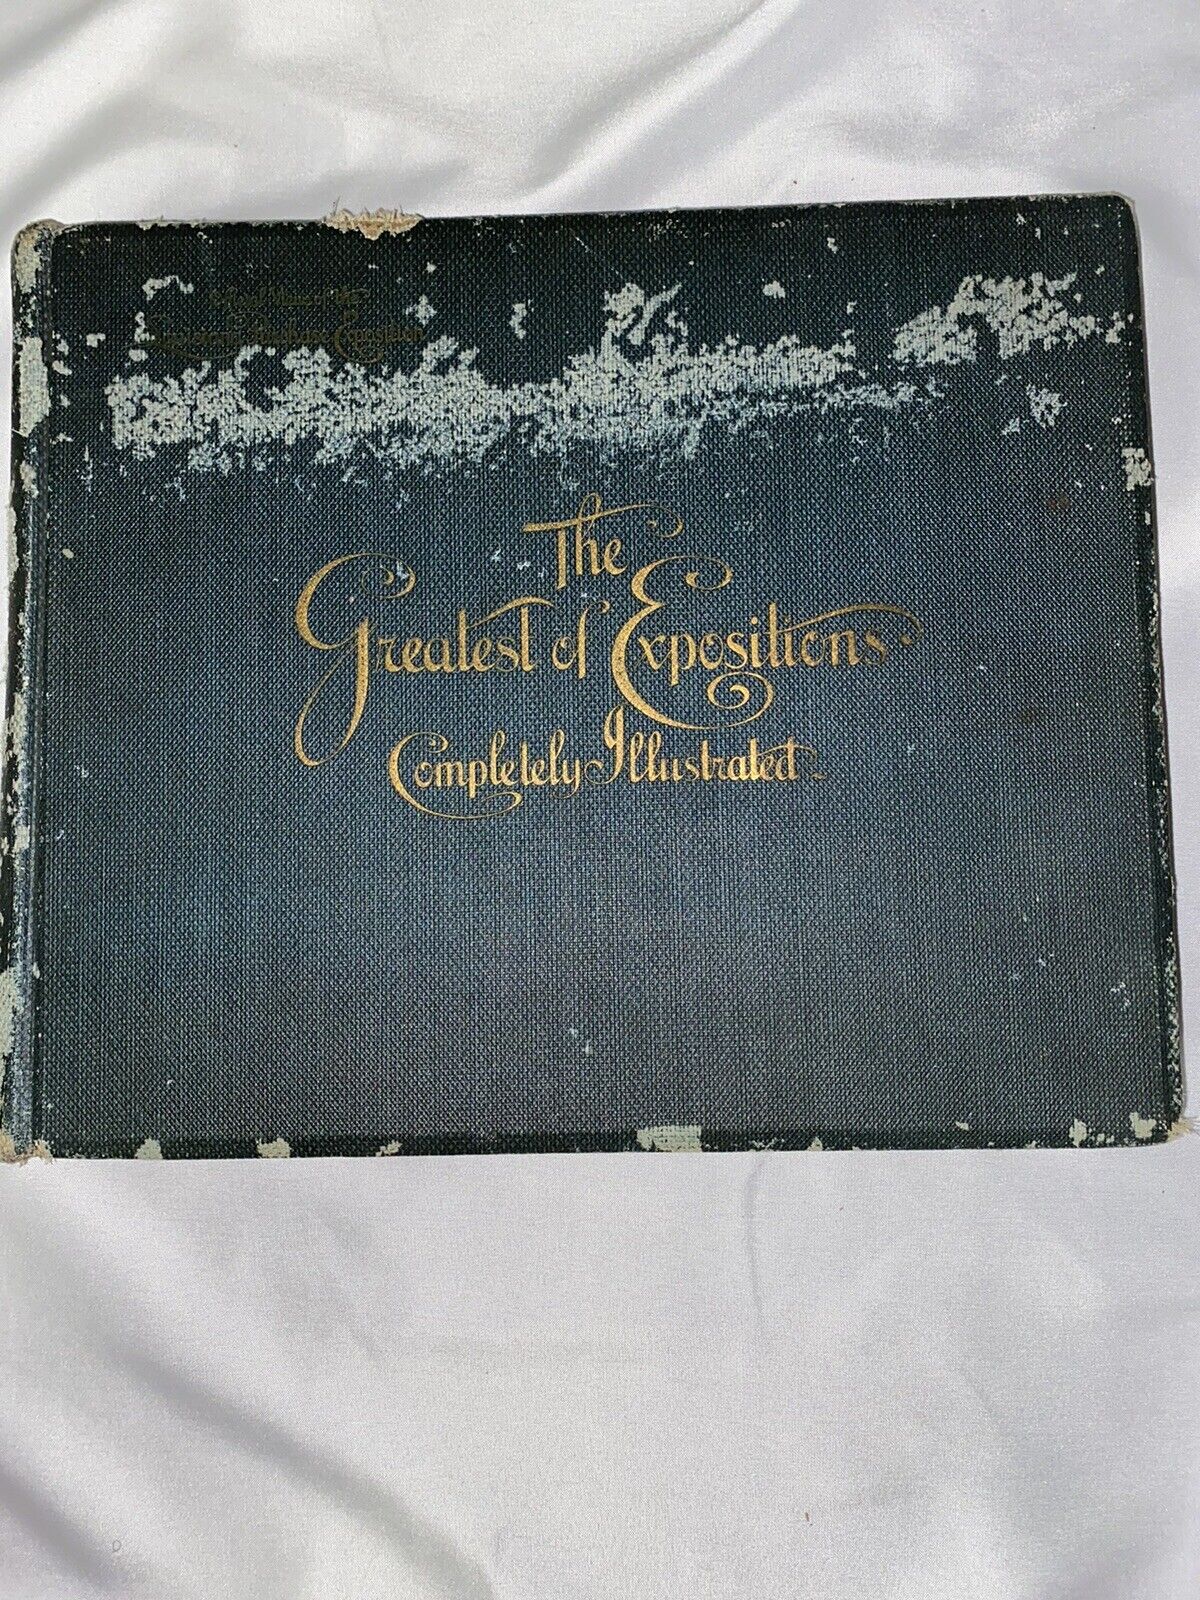 The Greatest Expositions Illustrated Book**1904 St. Louis Worlds Fair**